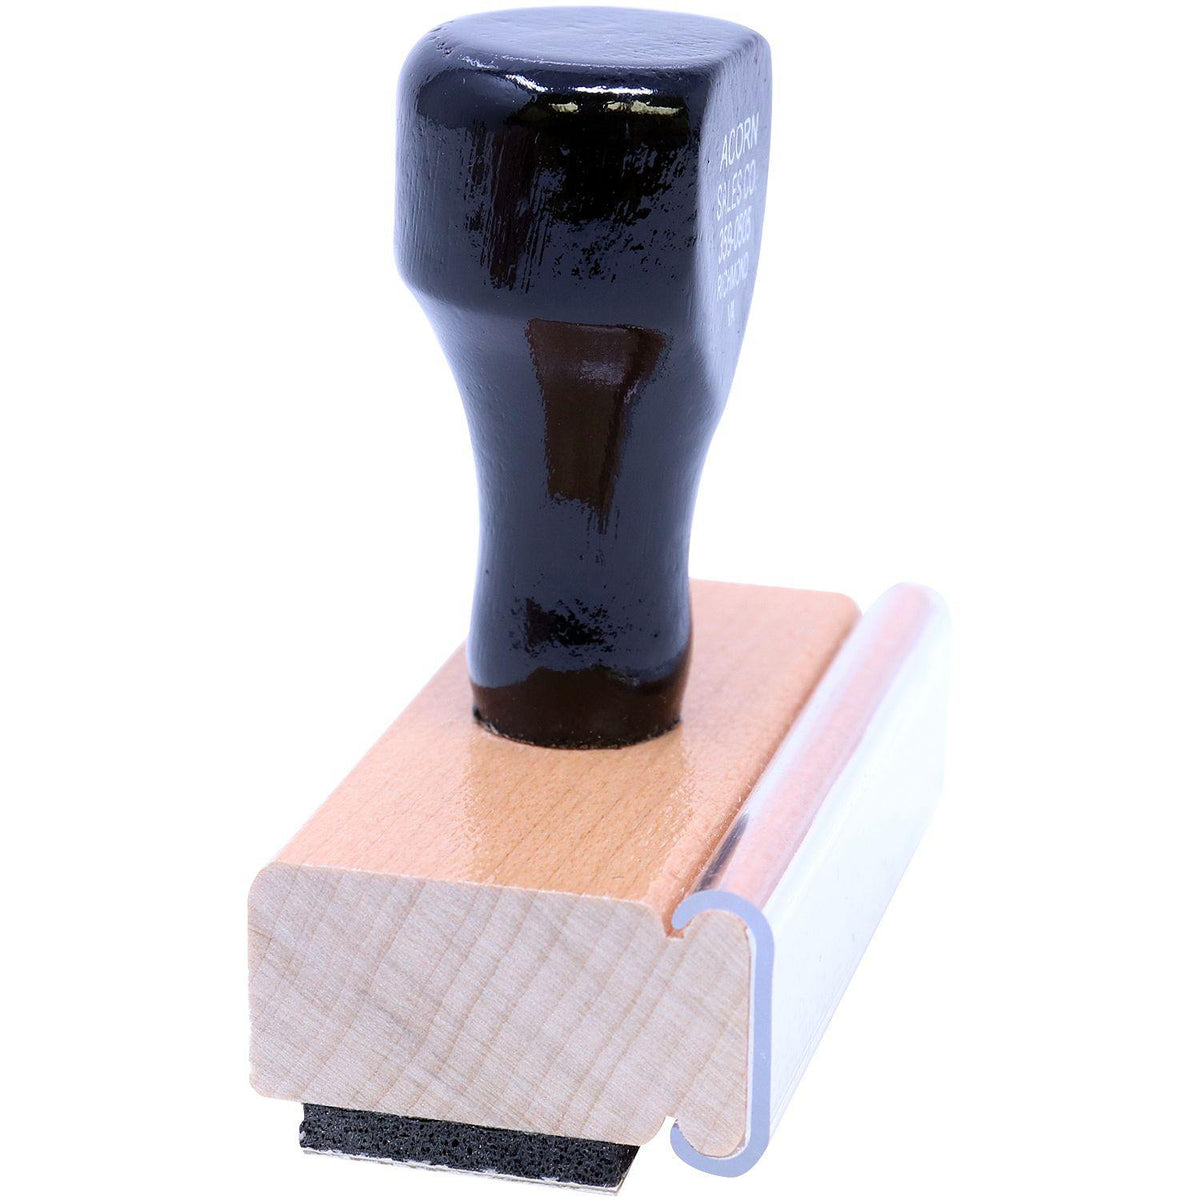 Side View of Large Received with In Box Icon Rubber Stamp at an Angle